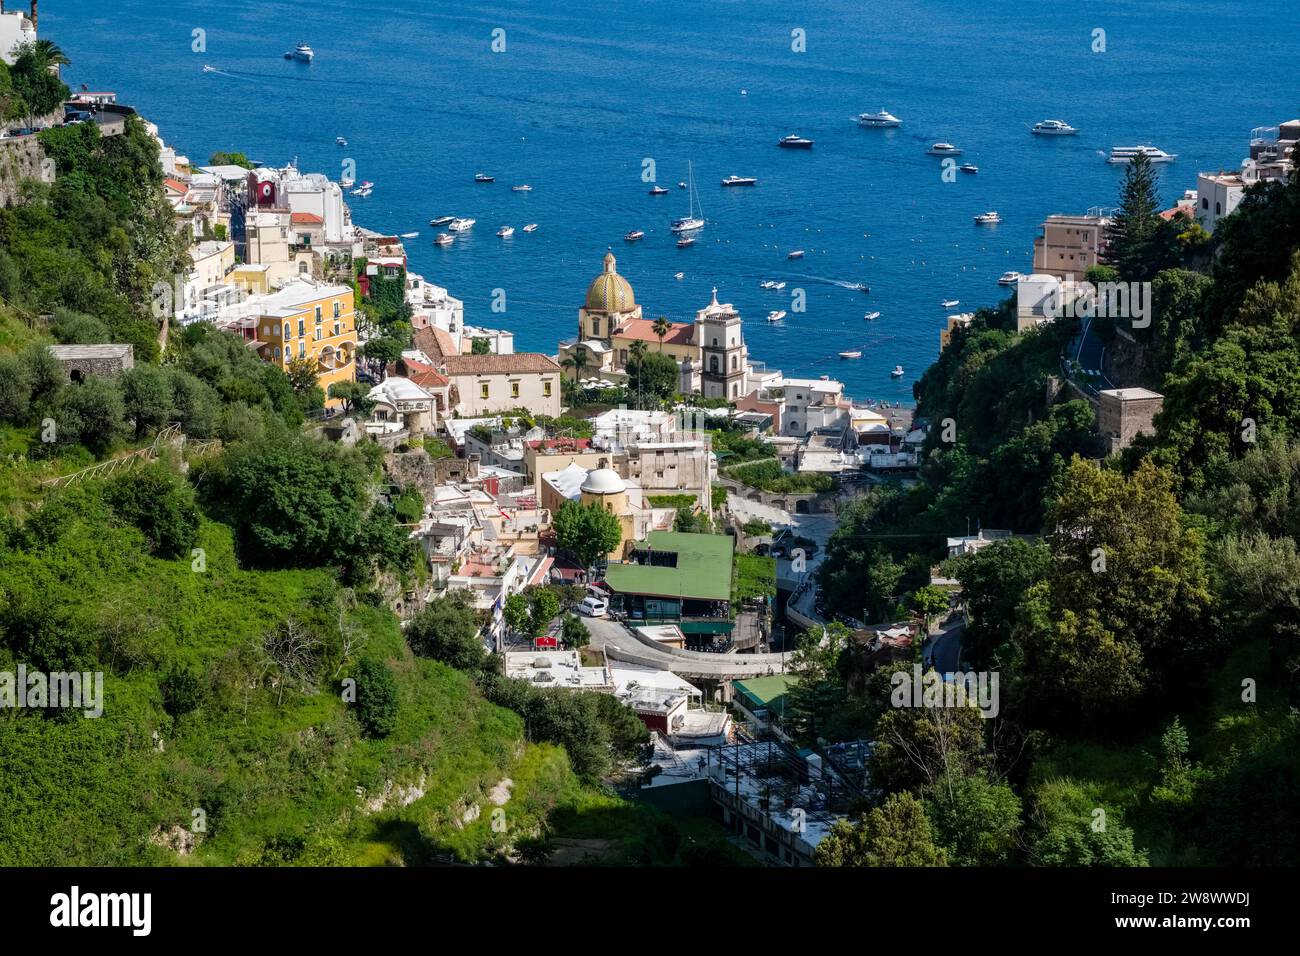 Aerial view of houses and the church Santa Maria Assunta of Positano on the Amalfi Coast, situated on a hill overlooking the Mediterranean Sea. Stock Photo